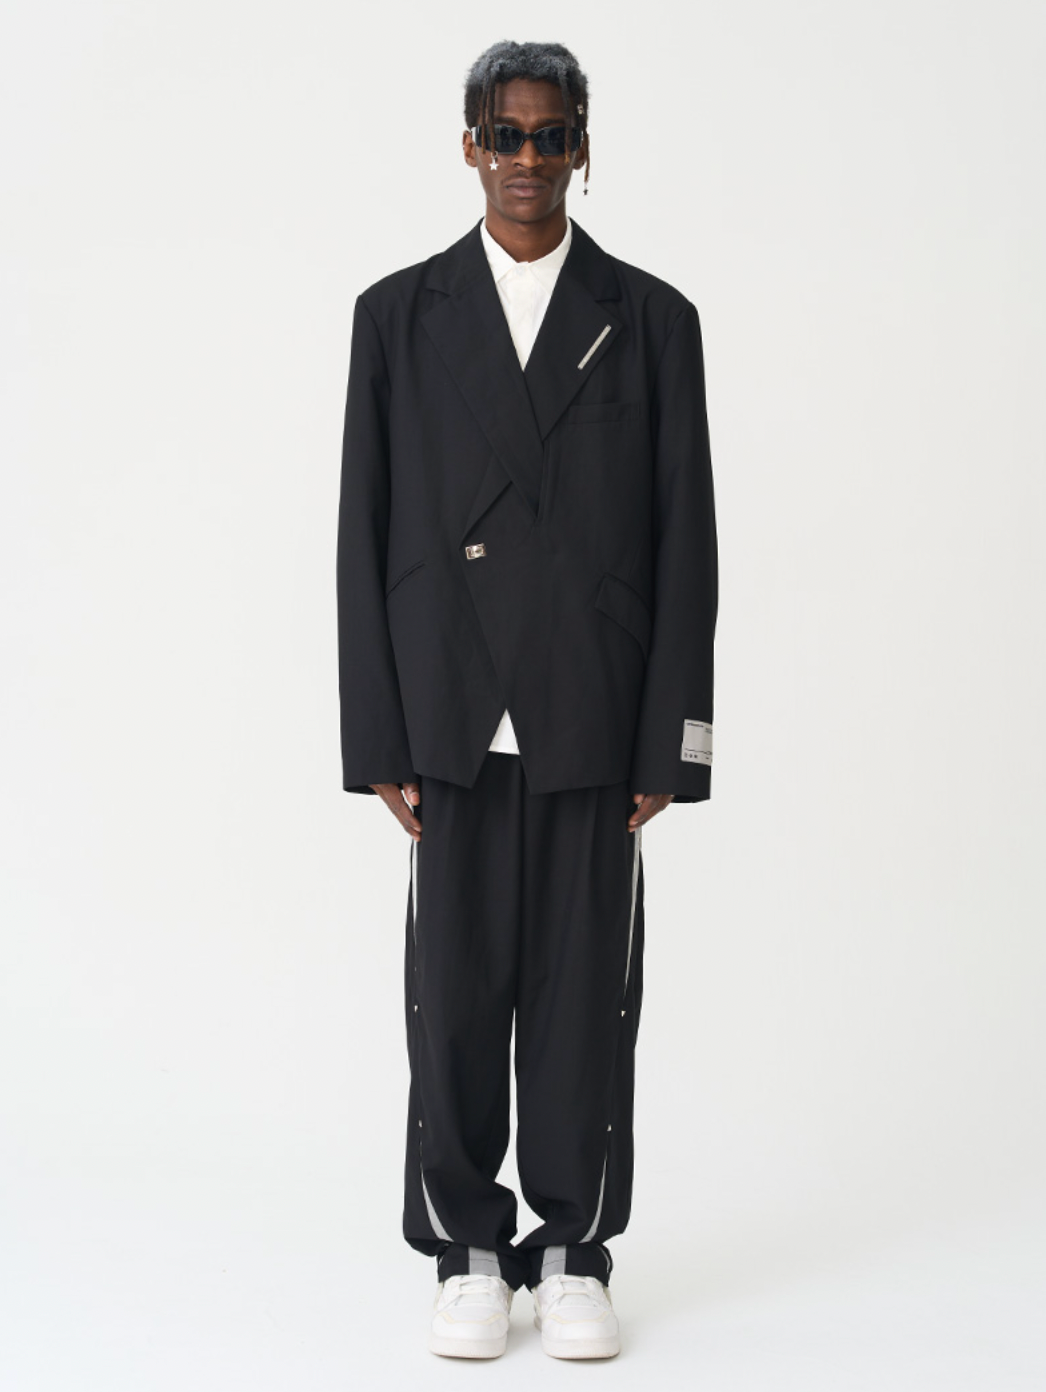 Harsh and Cruel Deconstructed Silhouette Suit Trousers